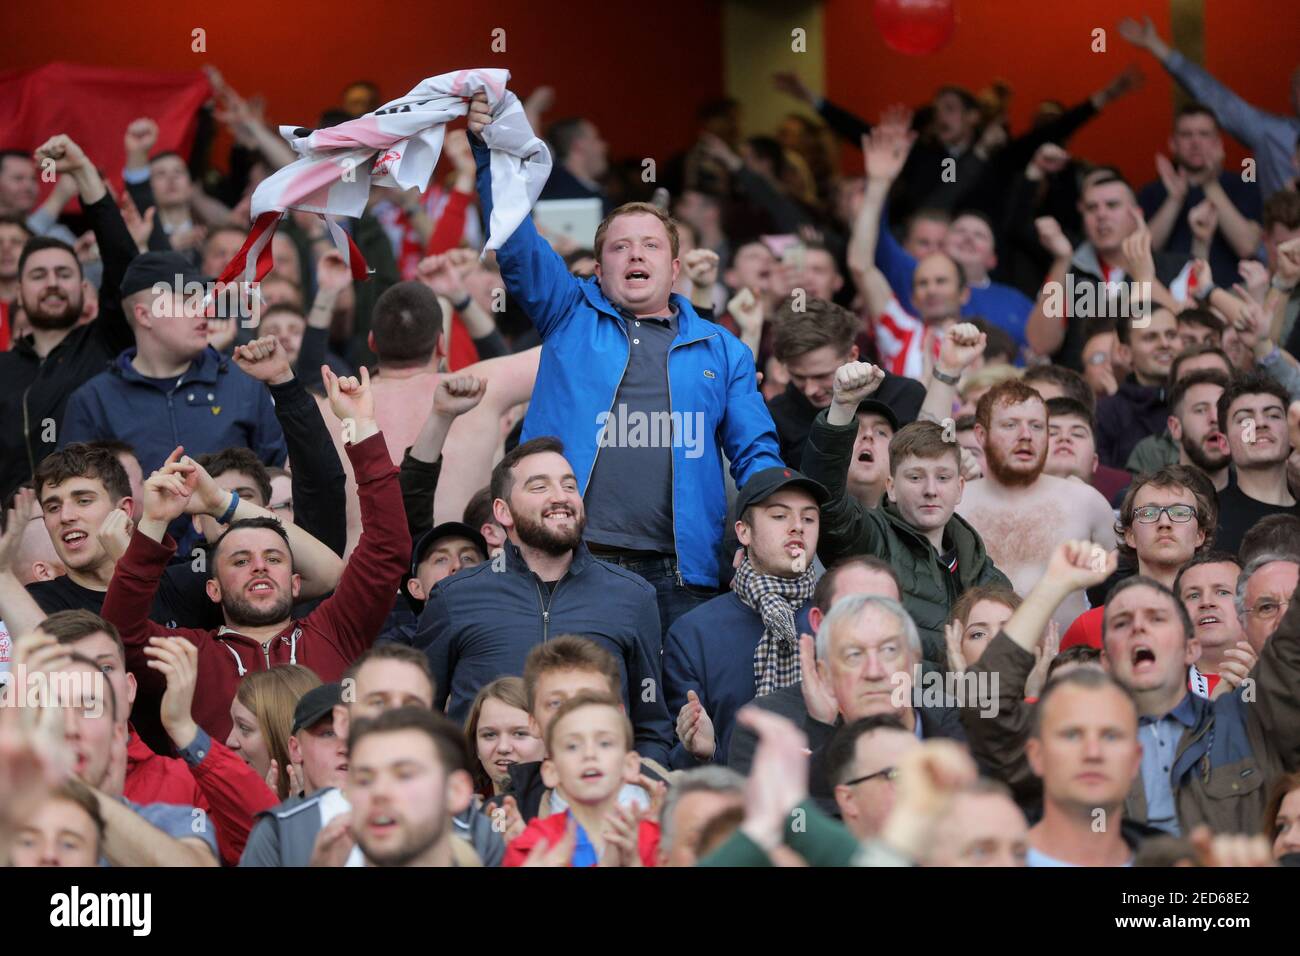 Britain Football Soccer - Arsenal v Lincoln City - FA Cup Quarter Final - The Emirates Stadium - 11/3/17 Lincoln City fans before the match  Reuters / Paul Hackett Livepic EDITORIAL USE ONLY. No use with unauthorized audio, video, data, fixture lists, club/league logos or 'live' services. Online in-match use limited to 45 images, no video emulation. No use in betting, games or single club/league/player publications.  Please contact your account representative for further details. Stock Photo